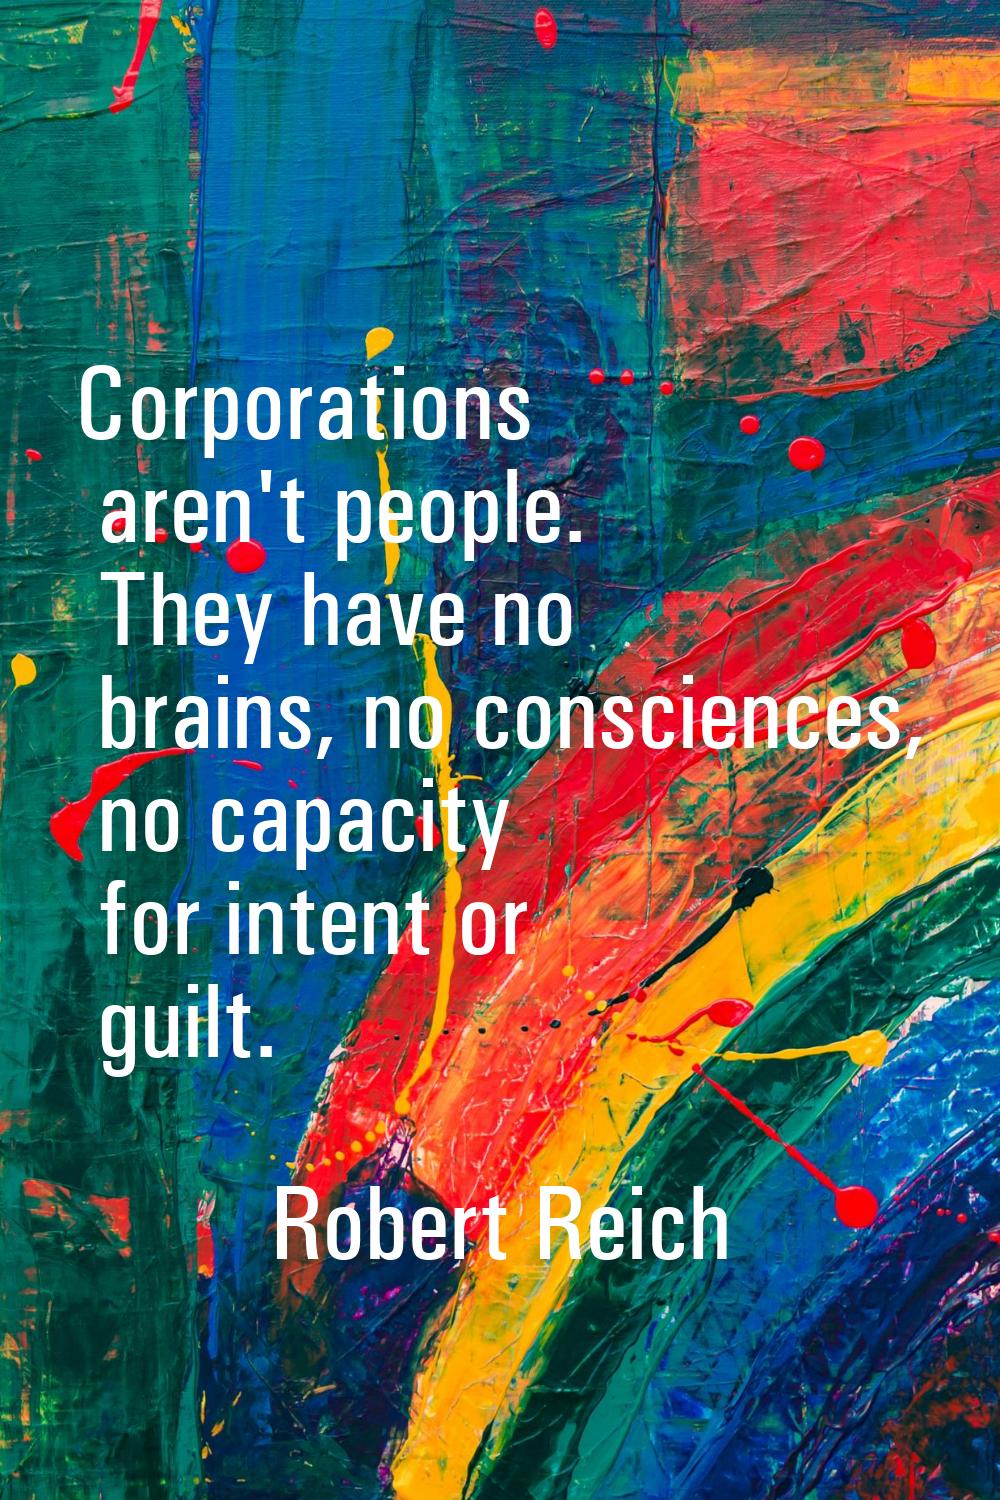 Corporations aren't people. They have no brains, no consciences, no capacity for intent or guilt.